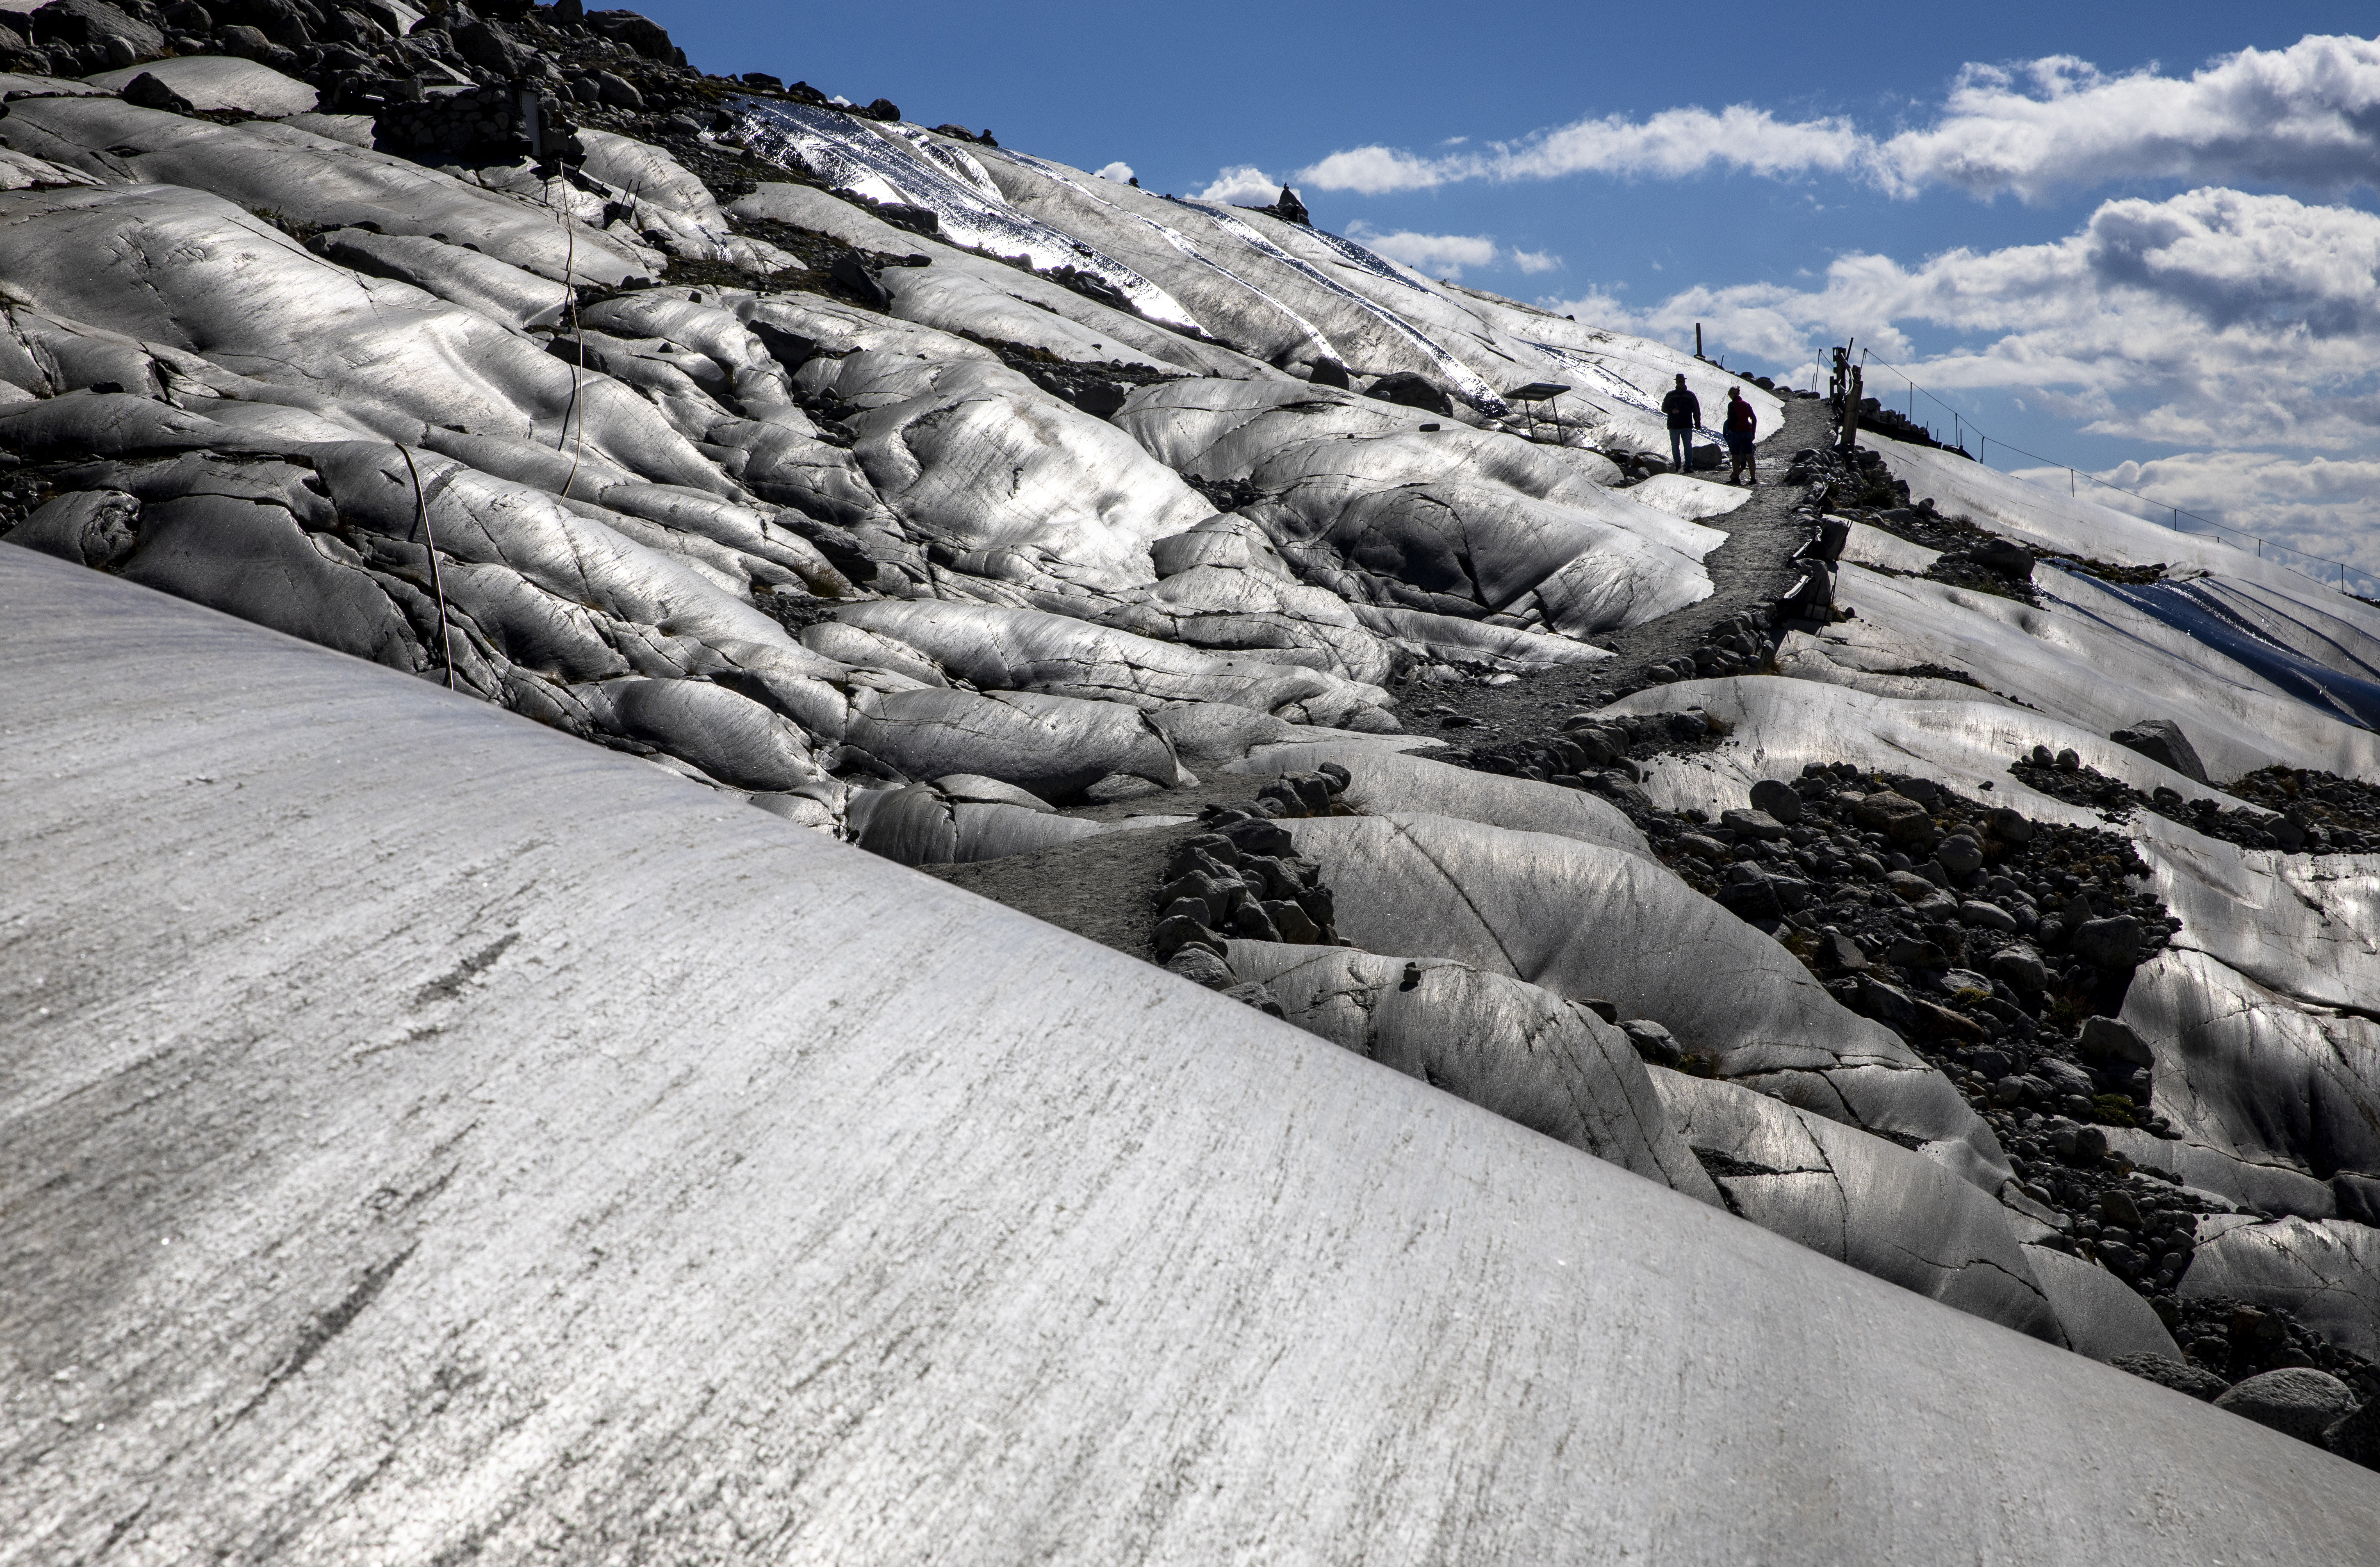 A view shows polished rocks after the glacier melted at the Rhone glacier in Obergoms